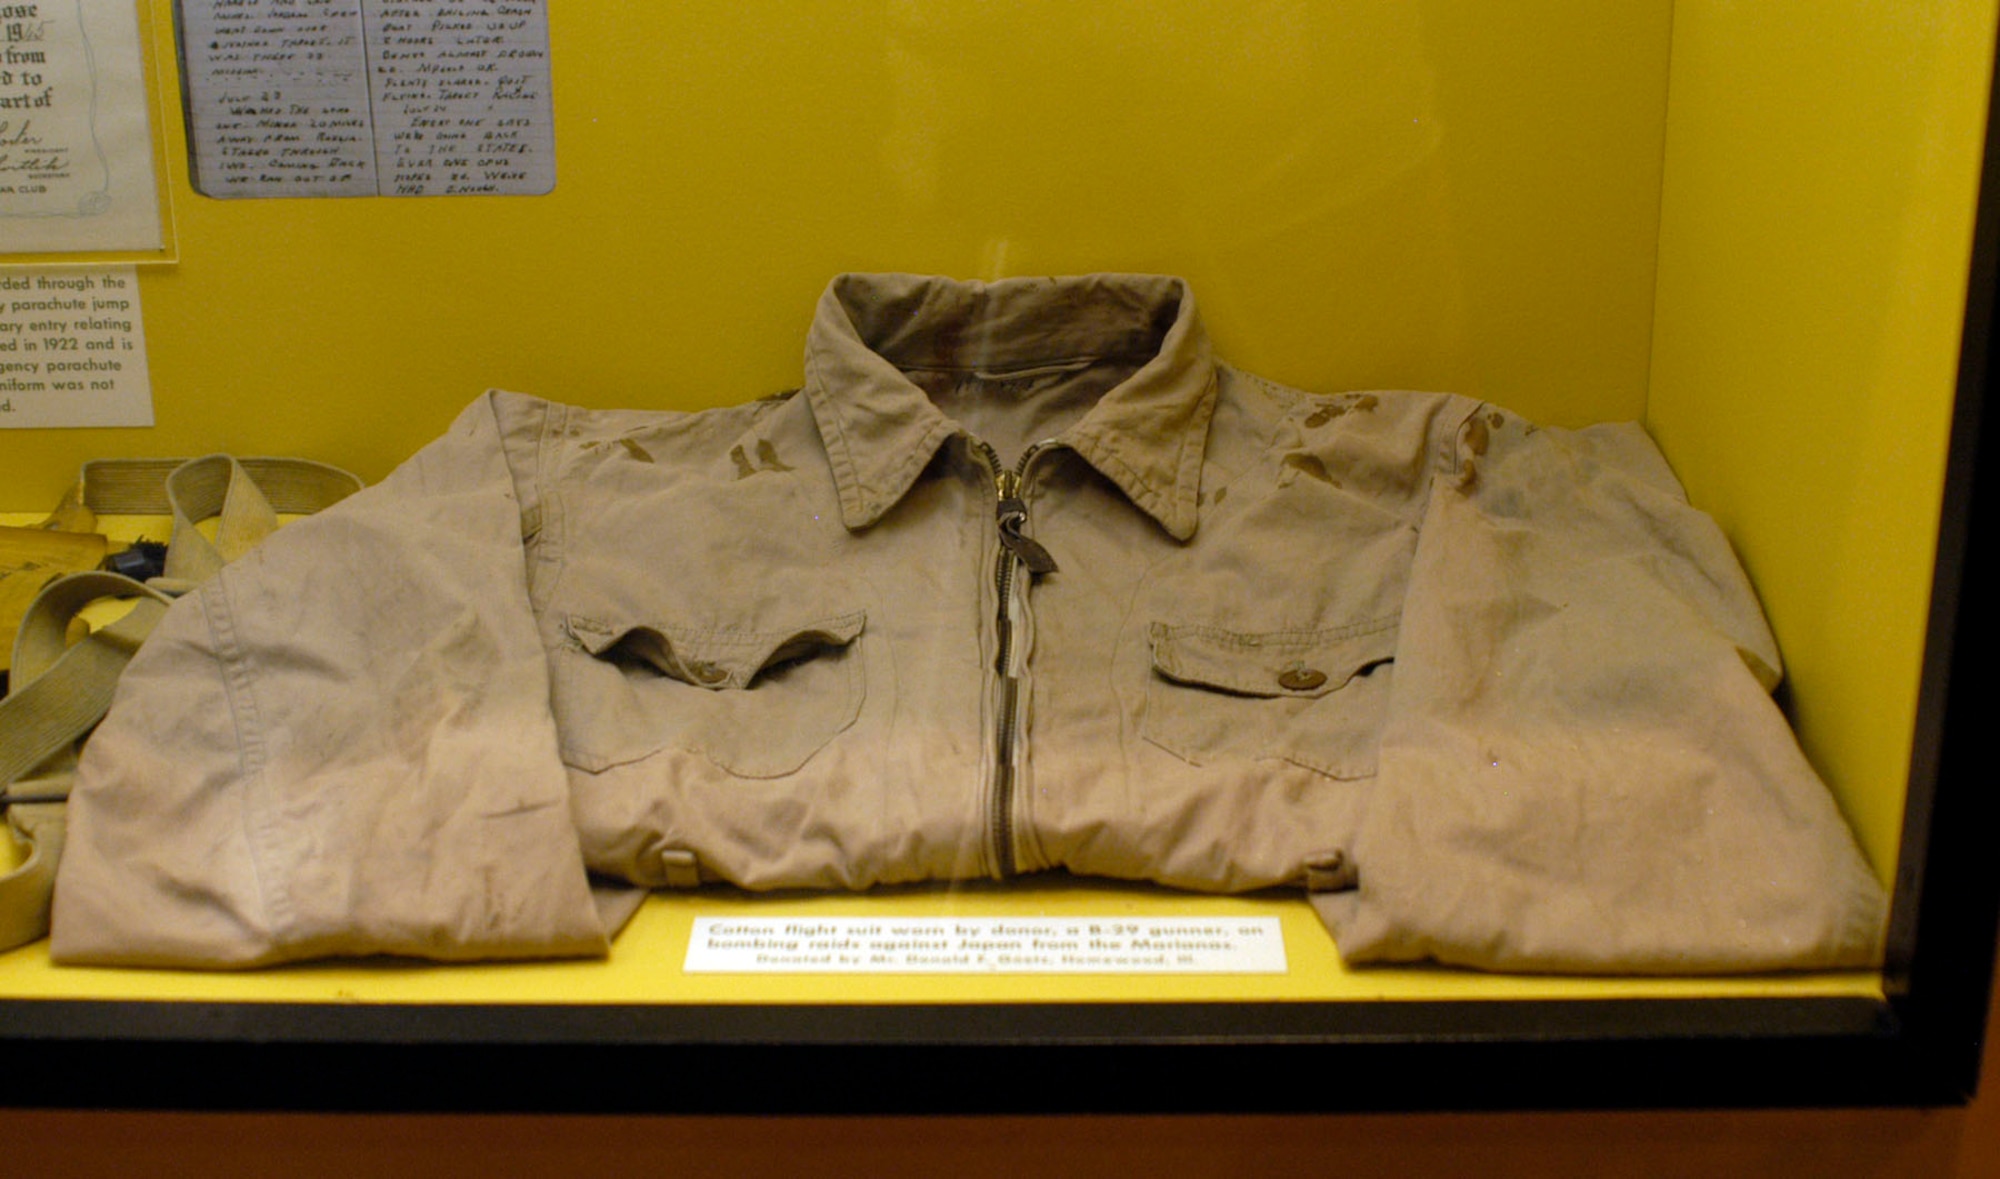 DAYTON, Ohio -- Cotton flight suit worn by the donor, a B-29 gunner, on bombing raids against Japan from the Marianas. The item, on display in the World War II Gallery at the National Museum of the U.S. Air Force, was donated by Donald F. Goetz, Homewood, Ill. (U.S. Air Force photo)